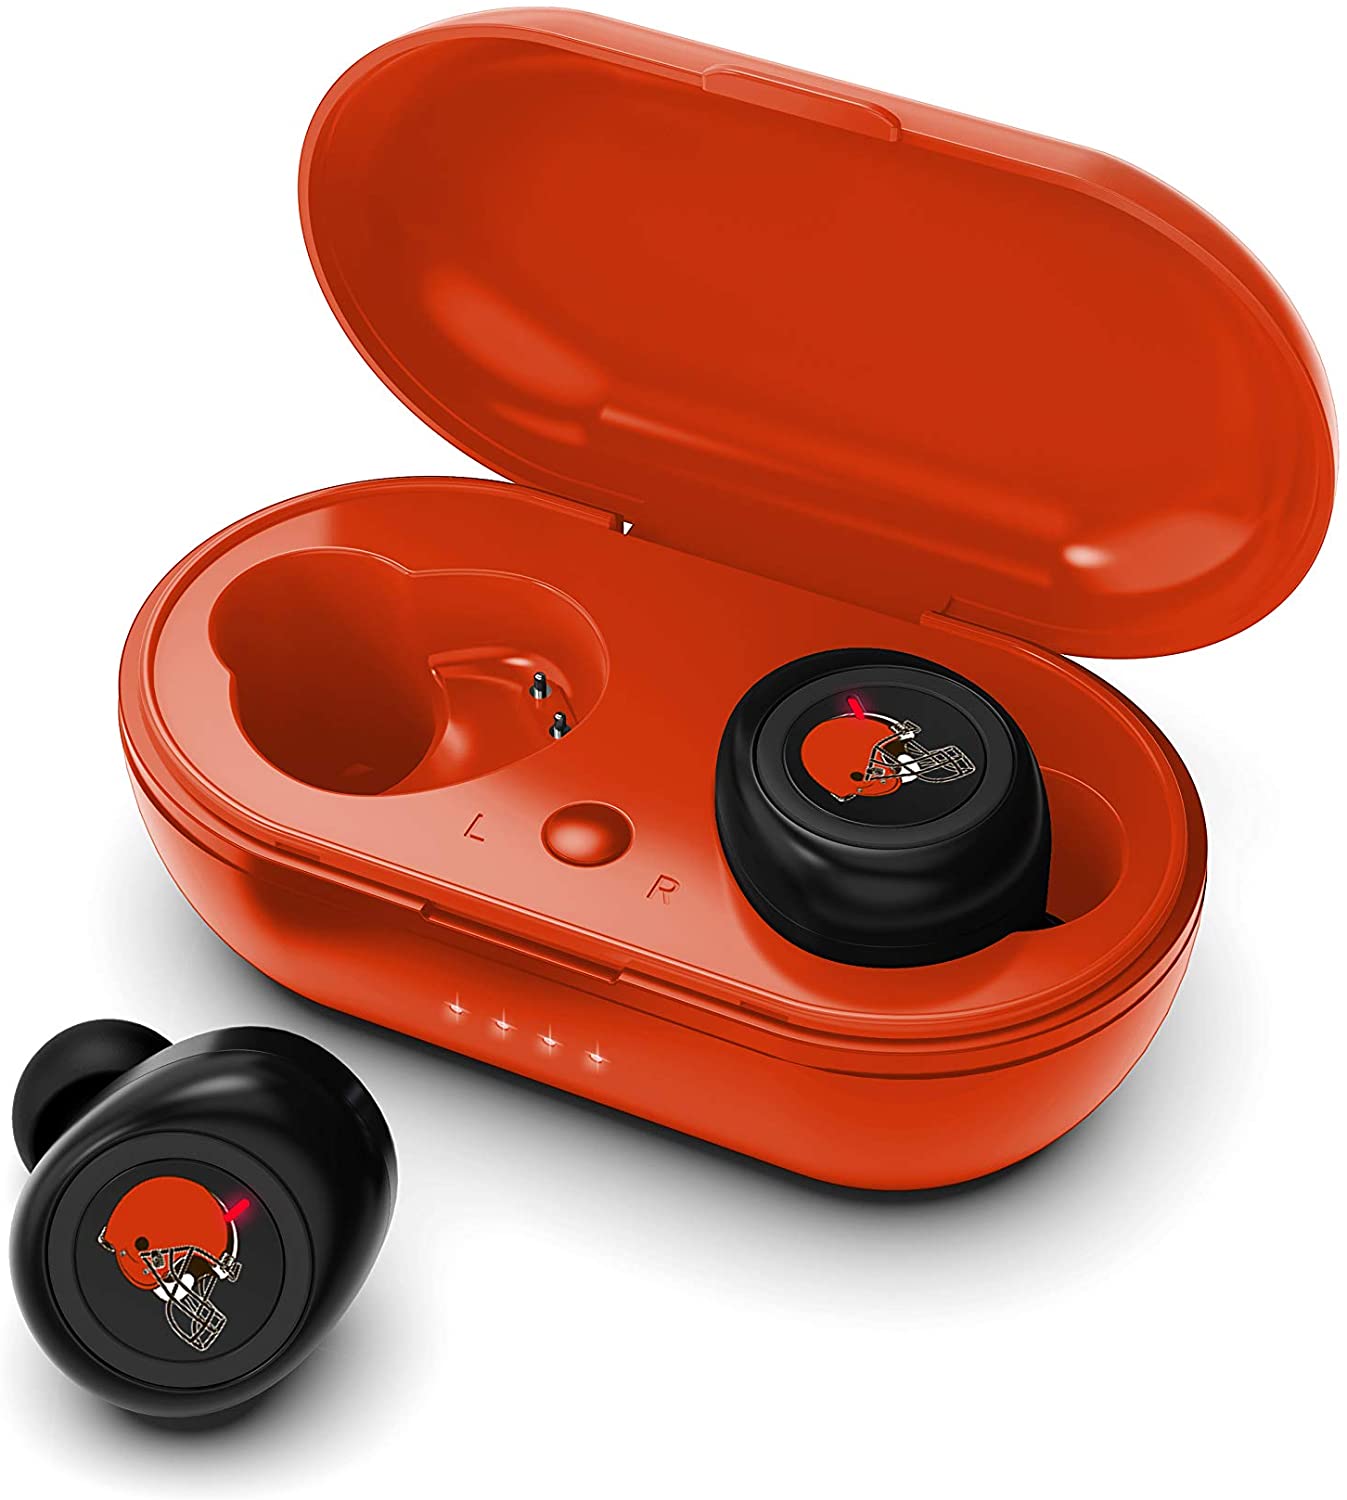 Cleveland Browns True Wireless Bluetooth Earbuds w/Charging Case by Prime Brands